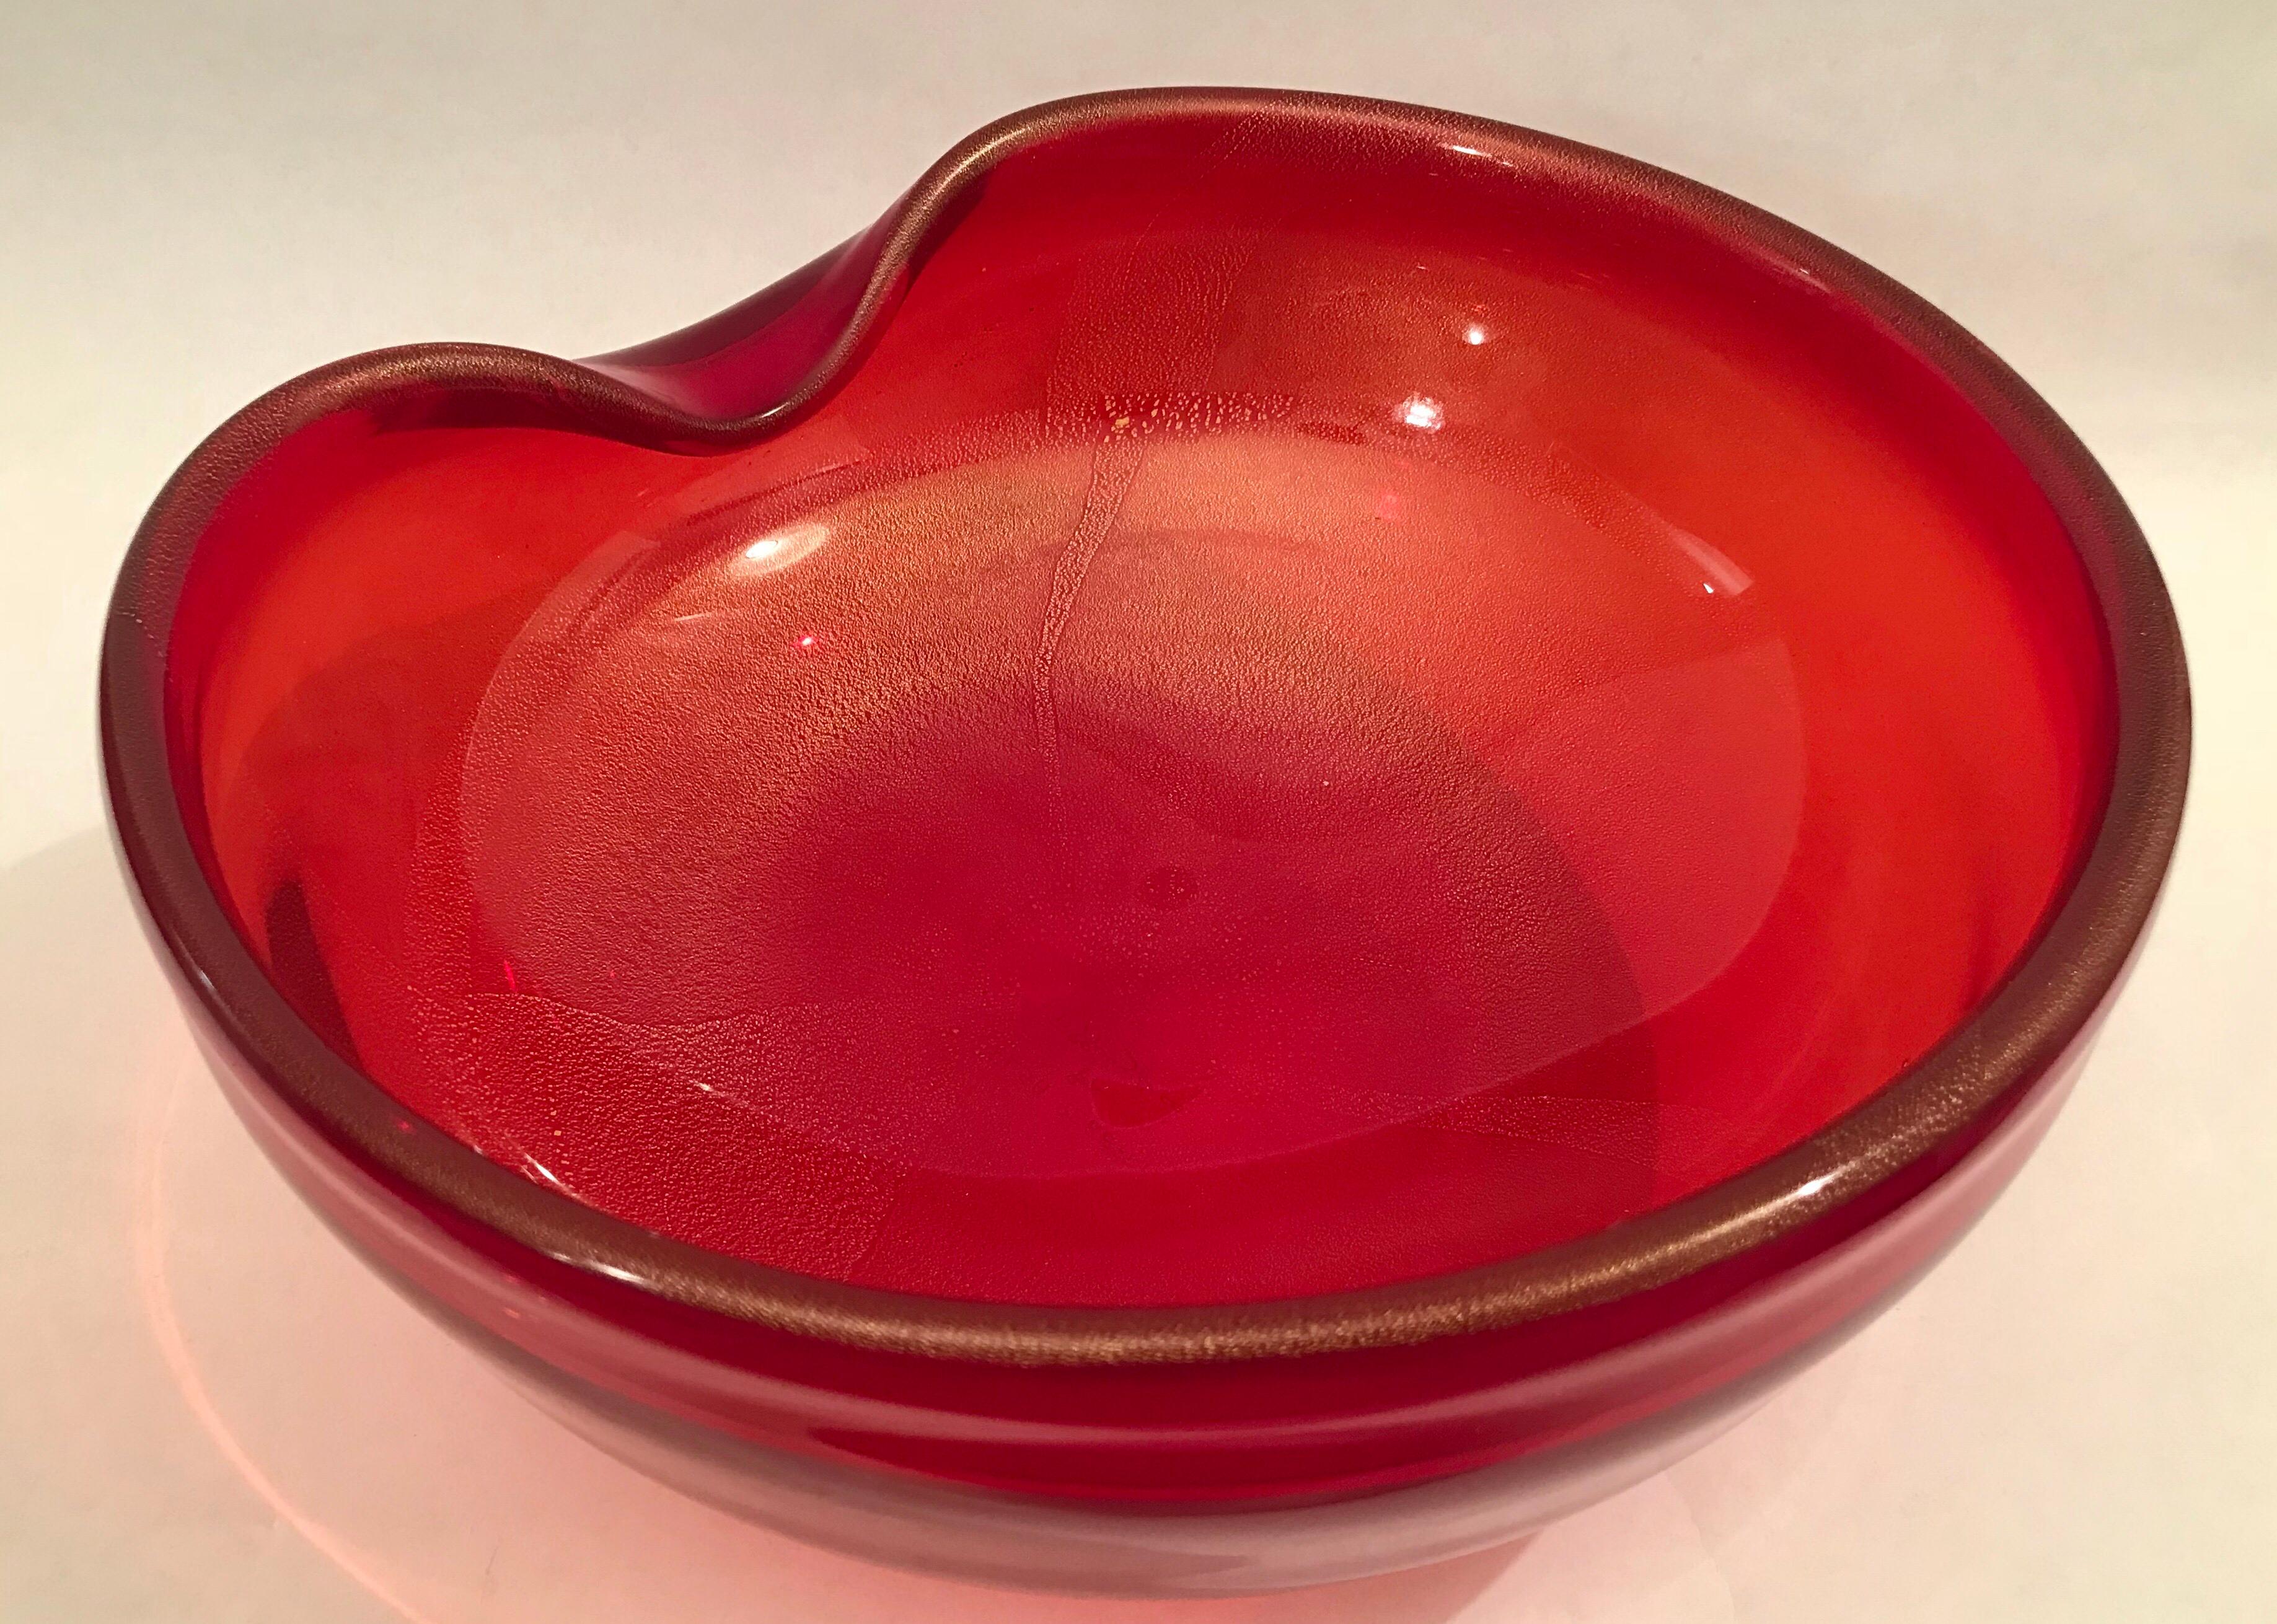 Elsa Peretti for Tiffany & Co. large red with gold inclusions art glass Thumbprint bowl.